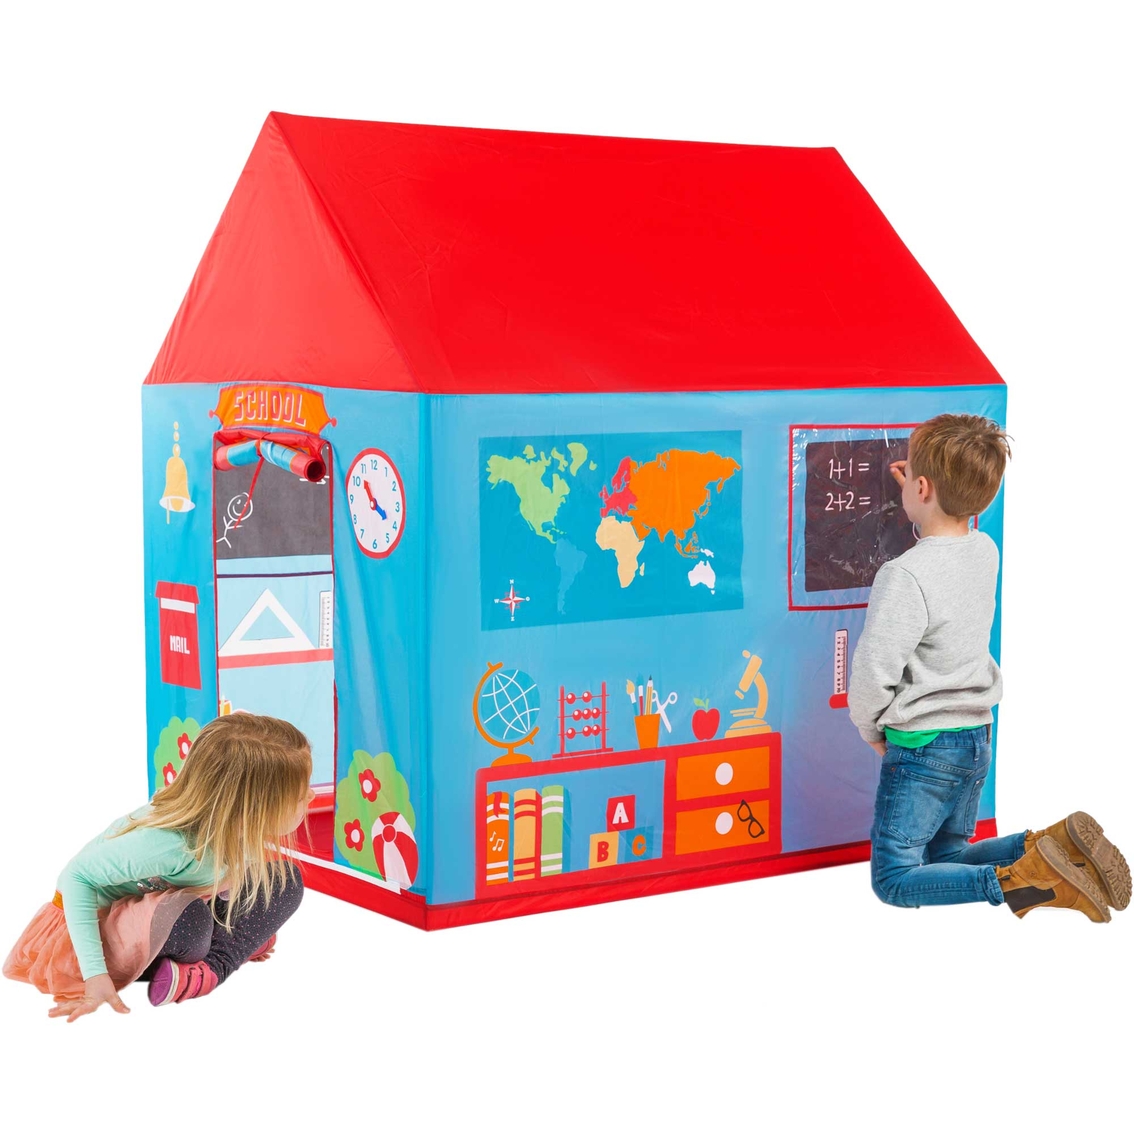 Fun2Give Pop It Up School Play Tent - Image 3 of 4